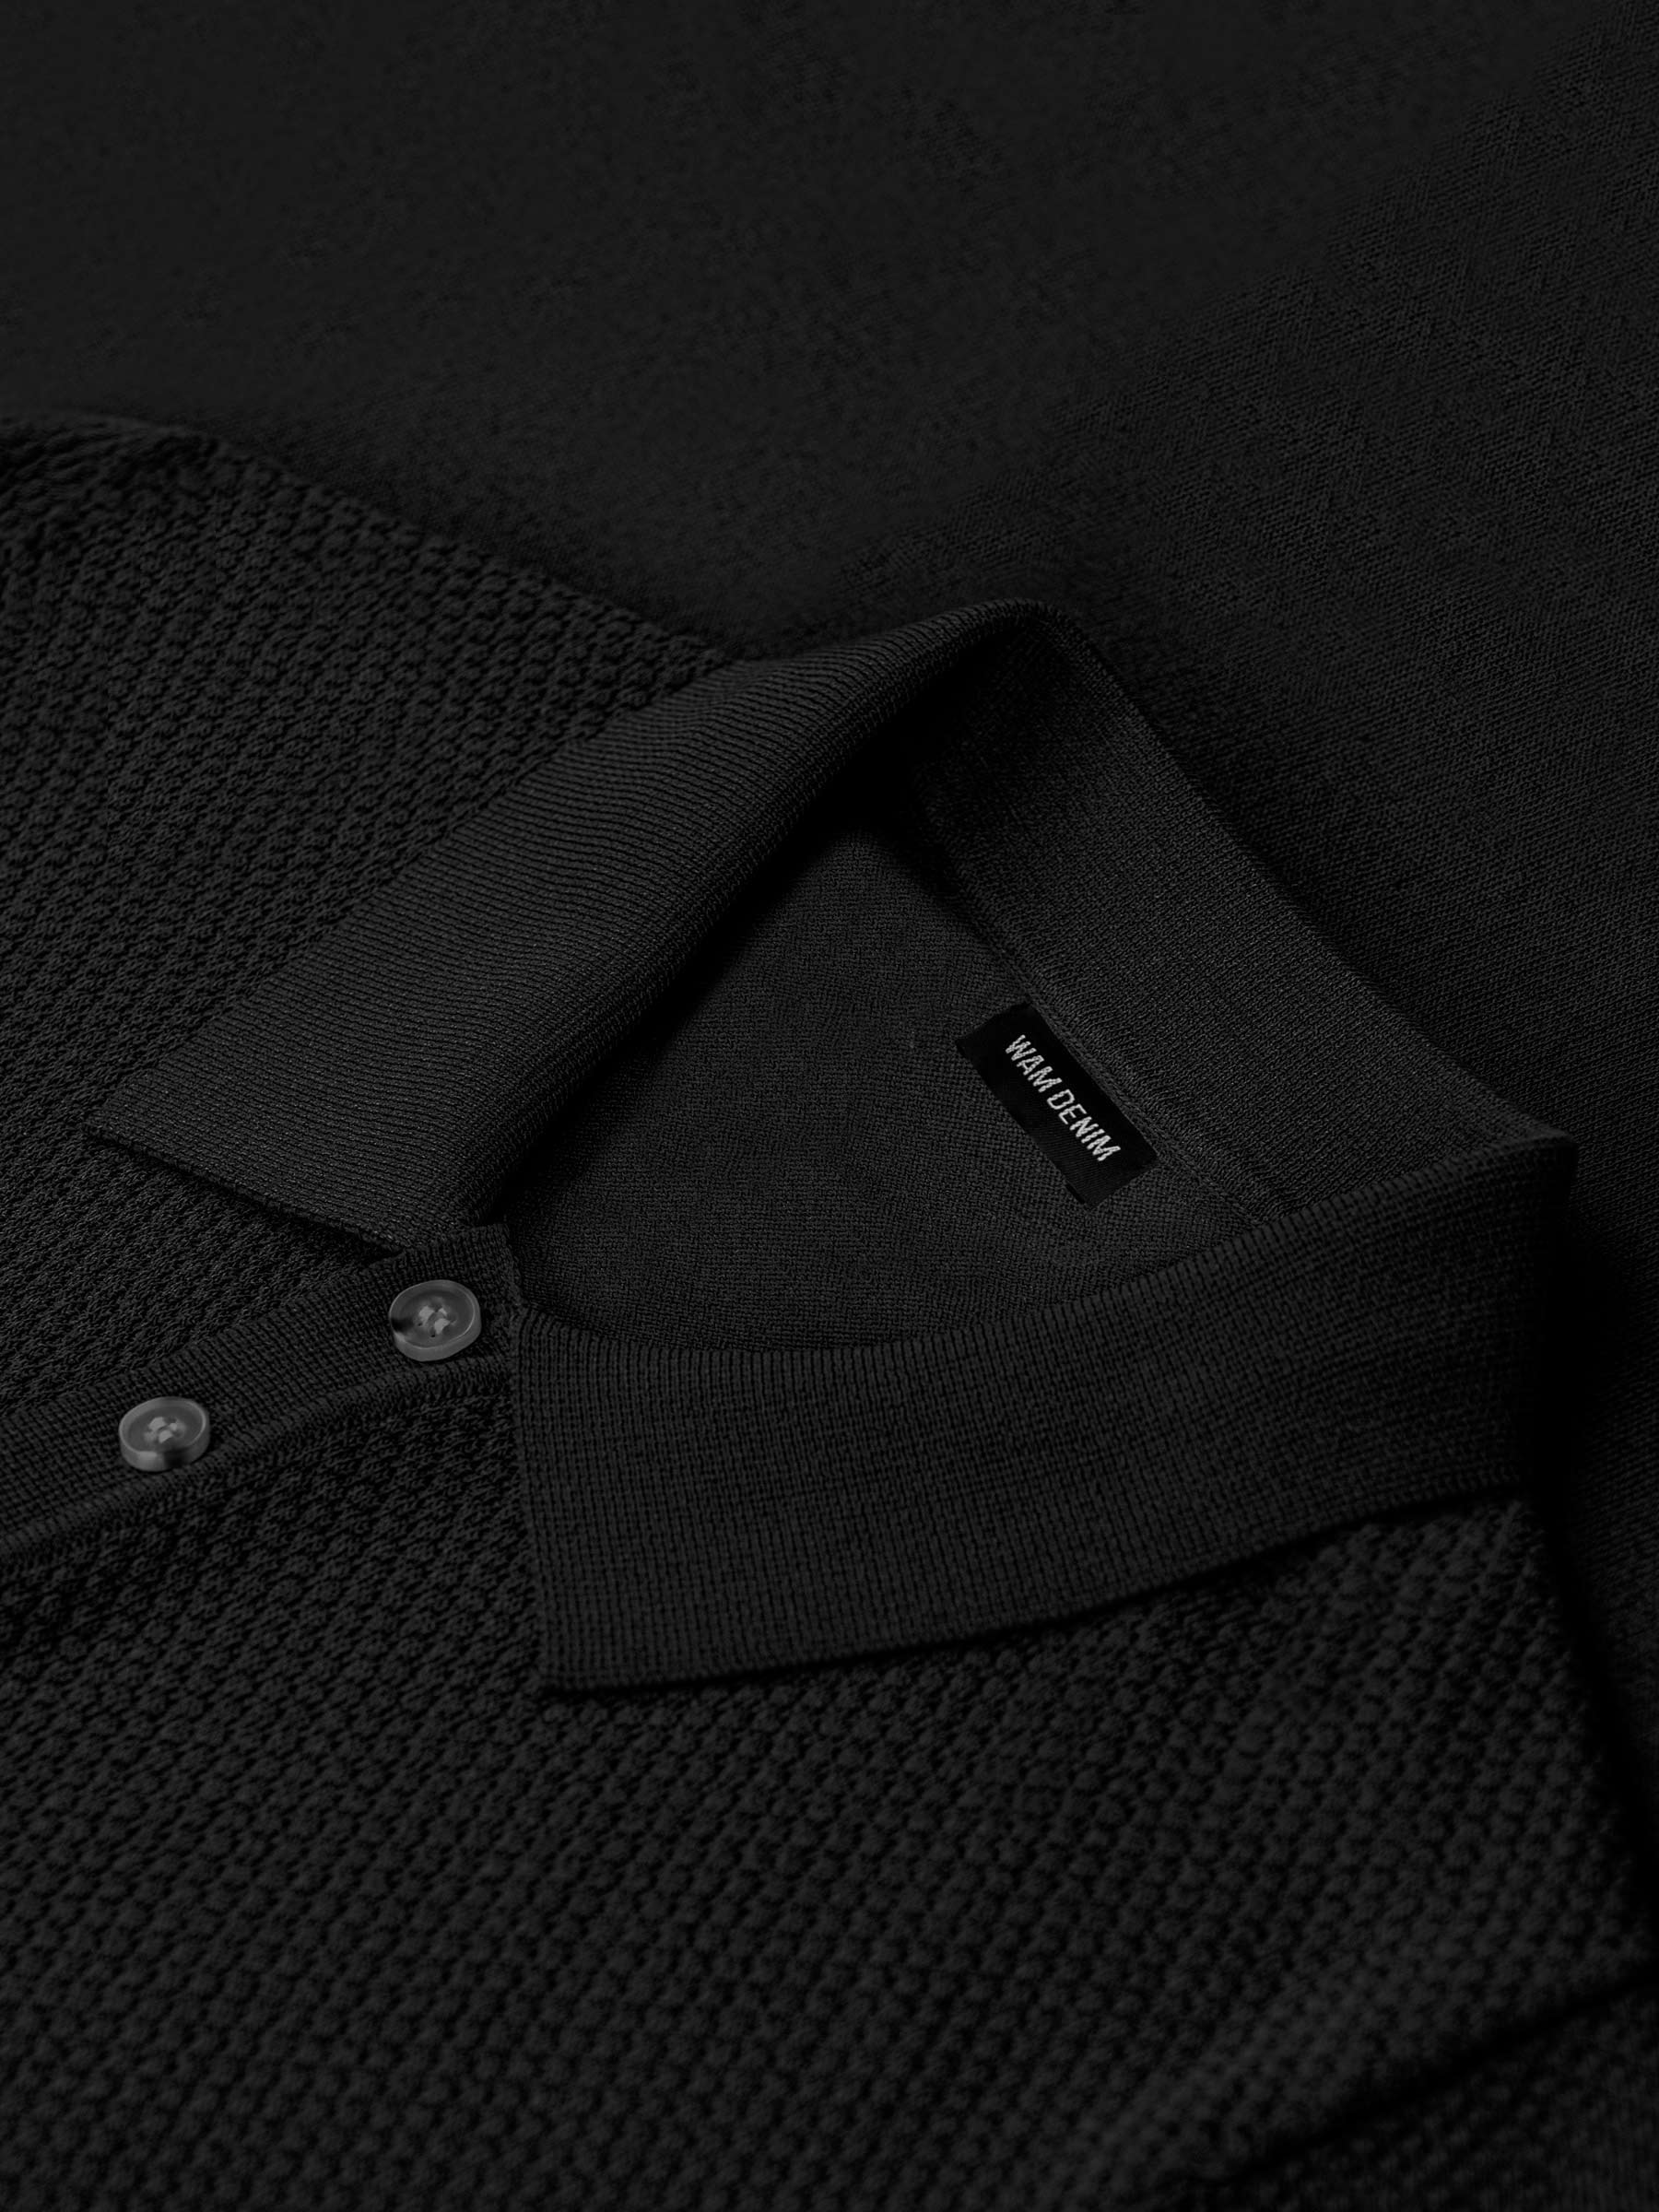 Henry Pique Knit Black Polo